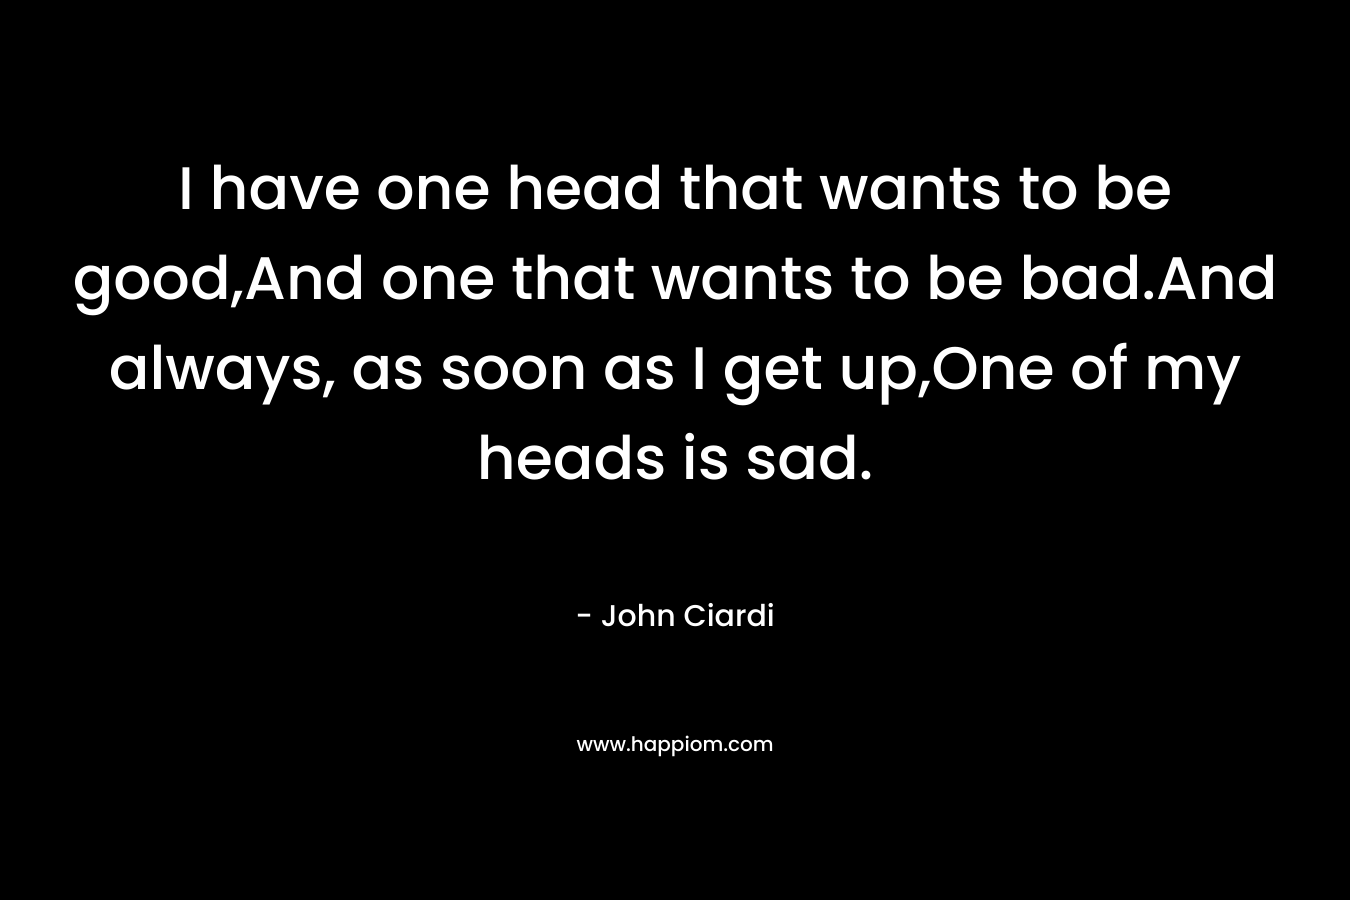 I have one head that wants to be good,And one that wants to be bad.And always, as soon as I get up,One of my heads is sad. – John Ciardi